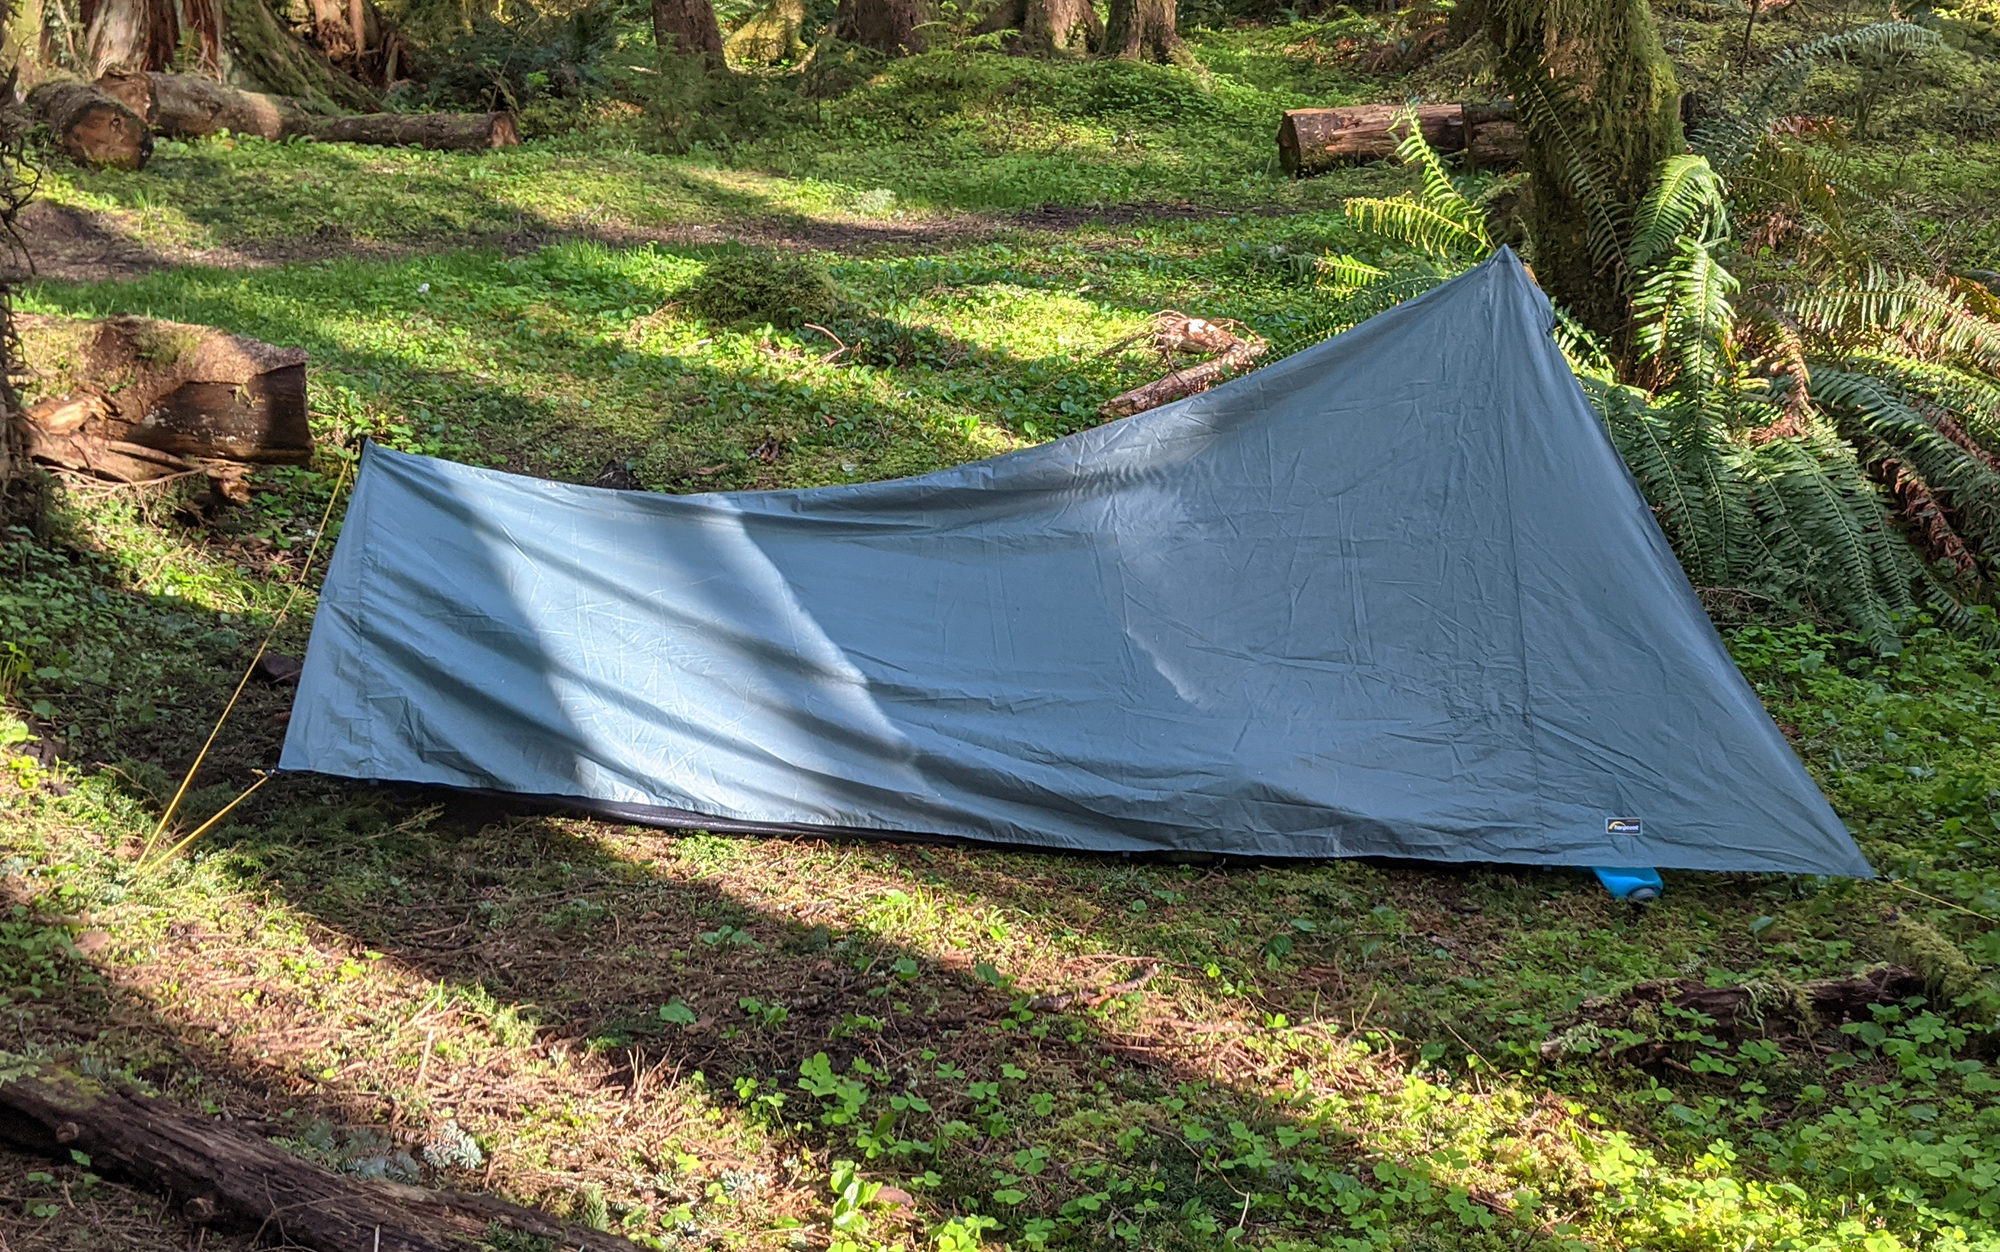 The tarptent sits in a forest.